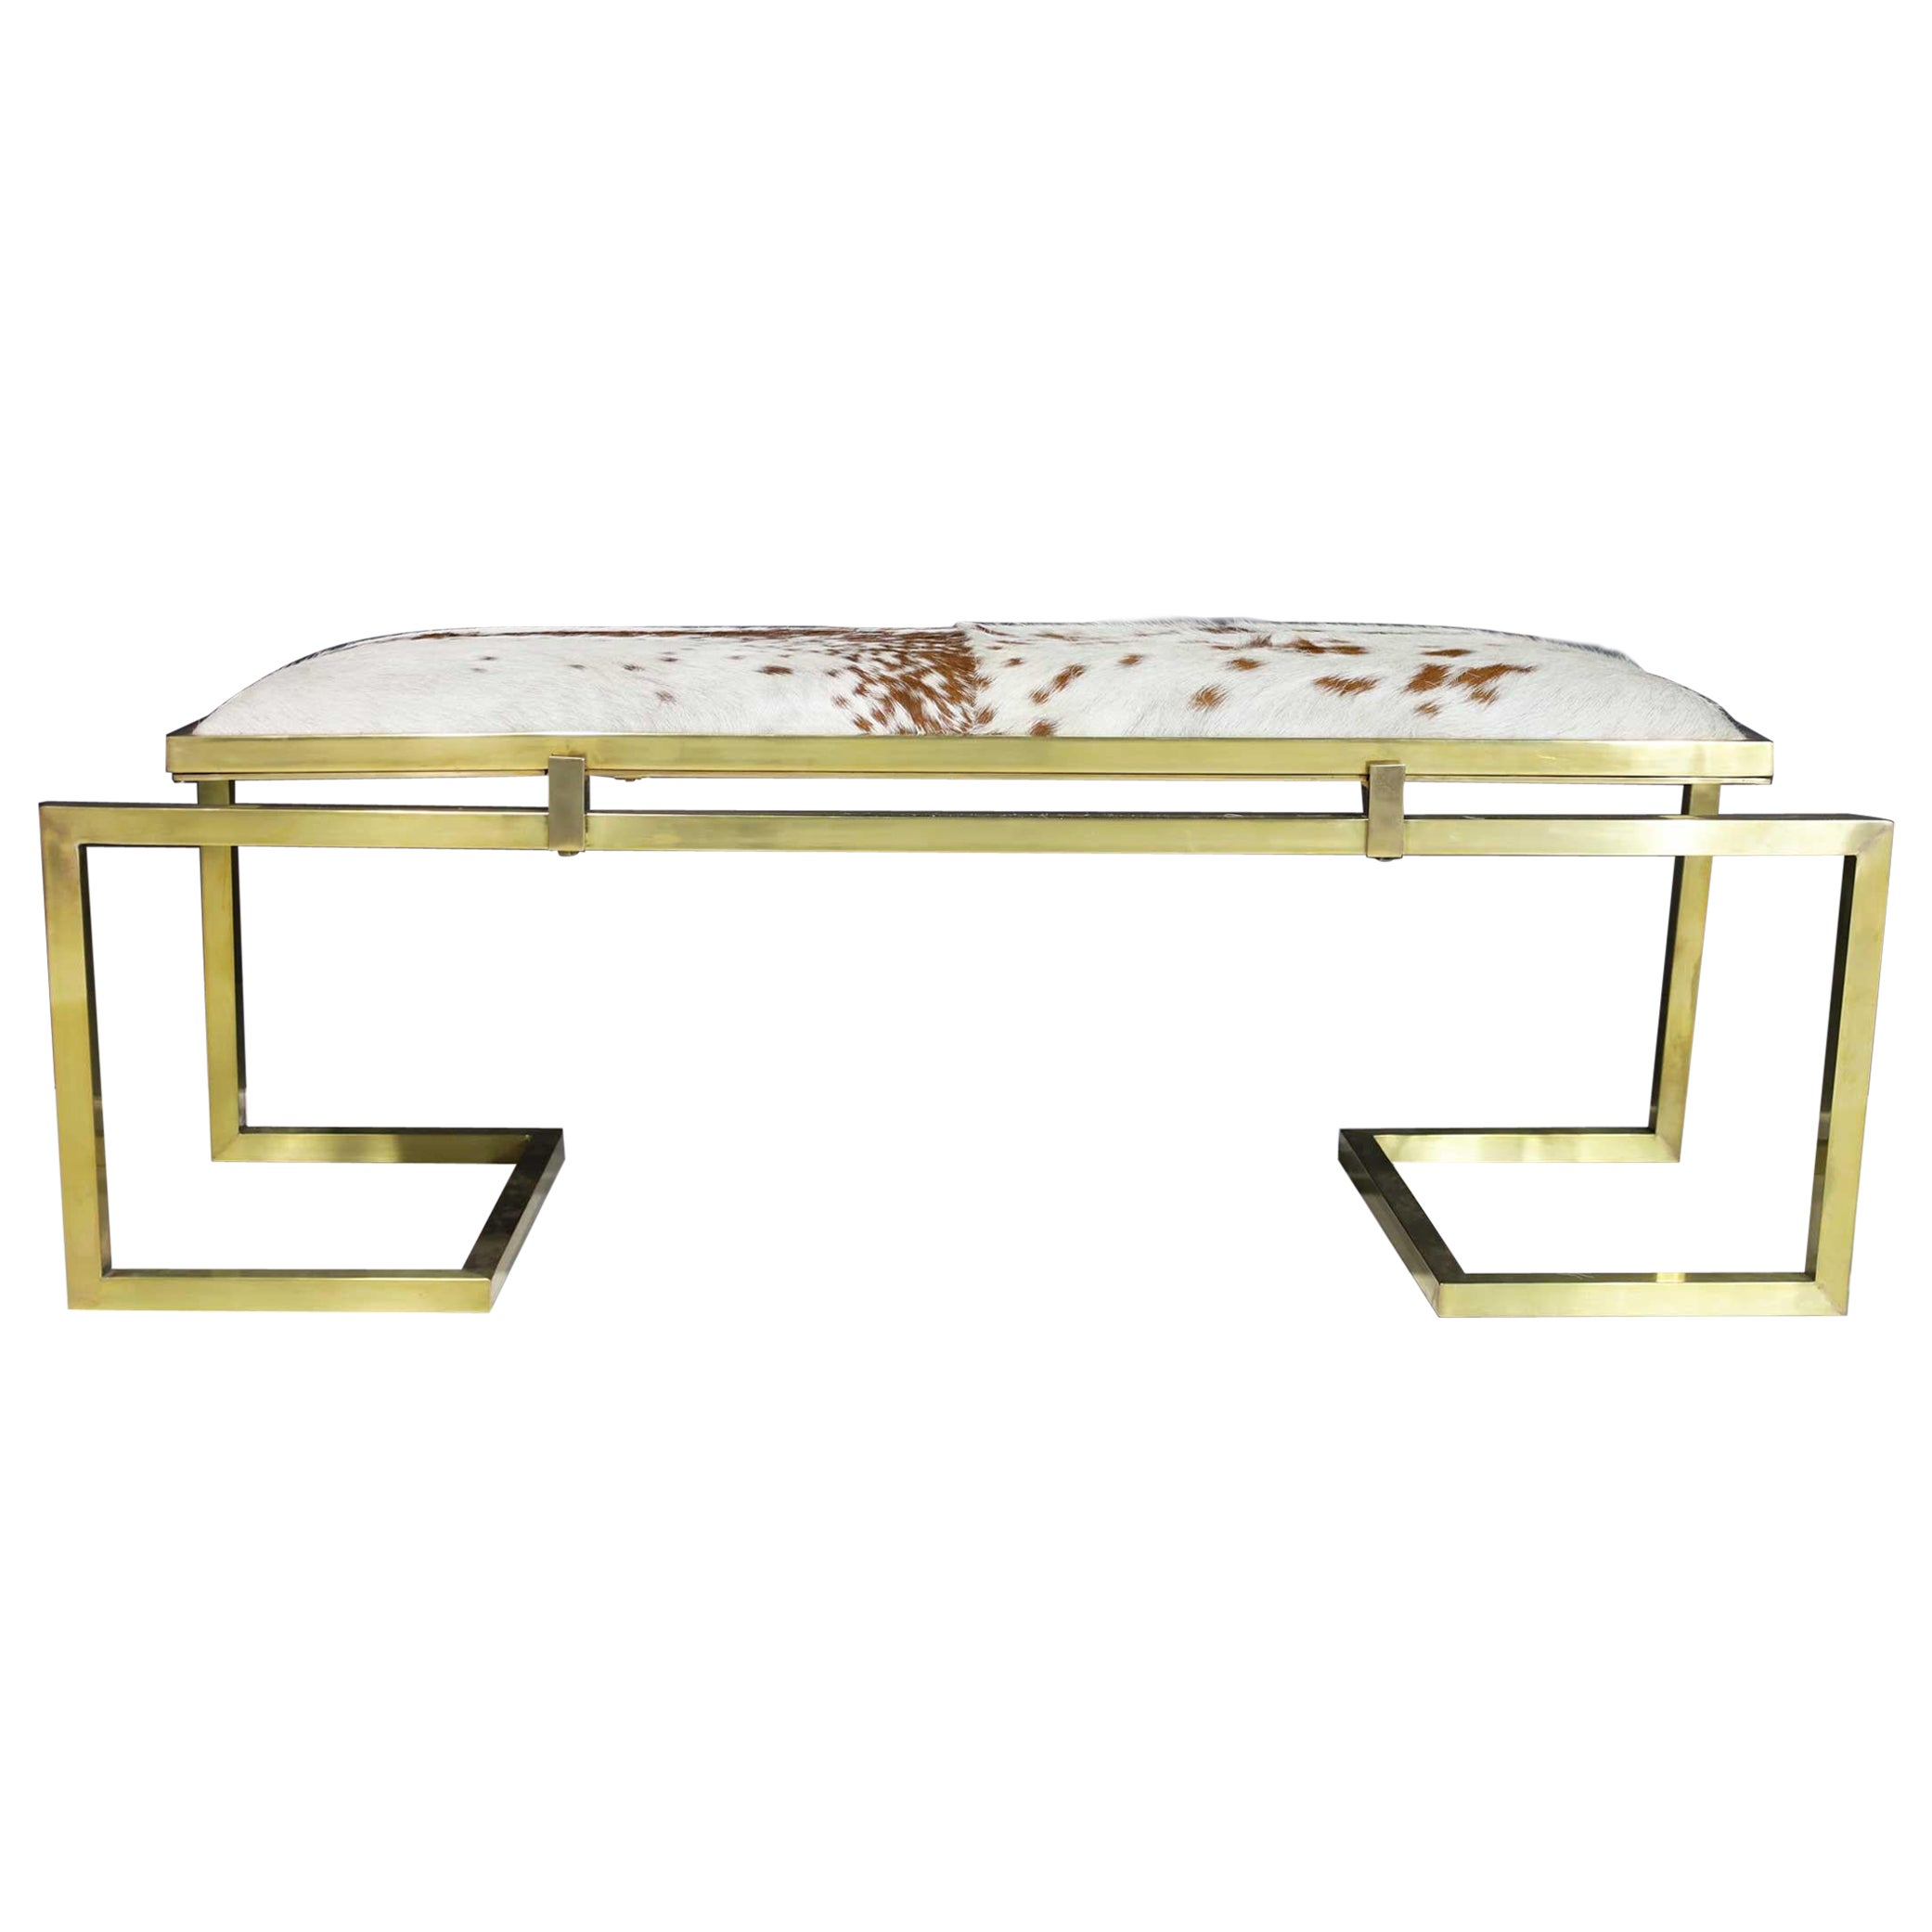 Scala Luxury "Clasp" Bench in Soild Brass and Hair on Hide Upholstery